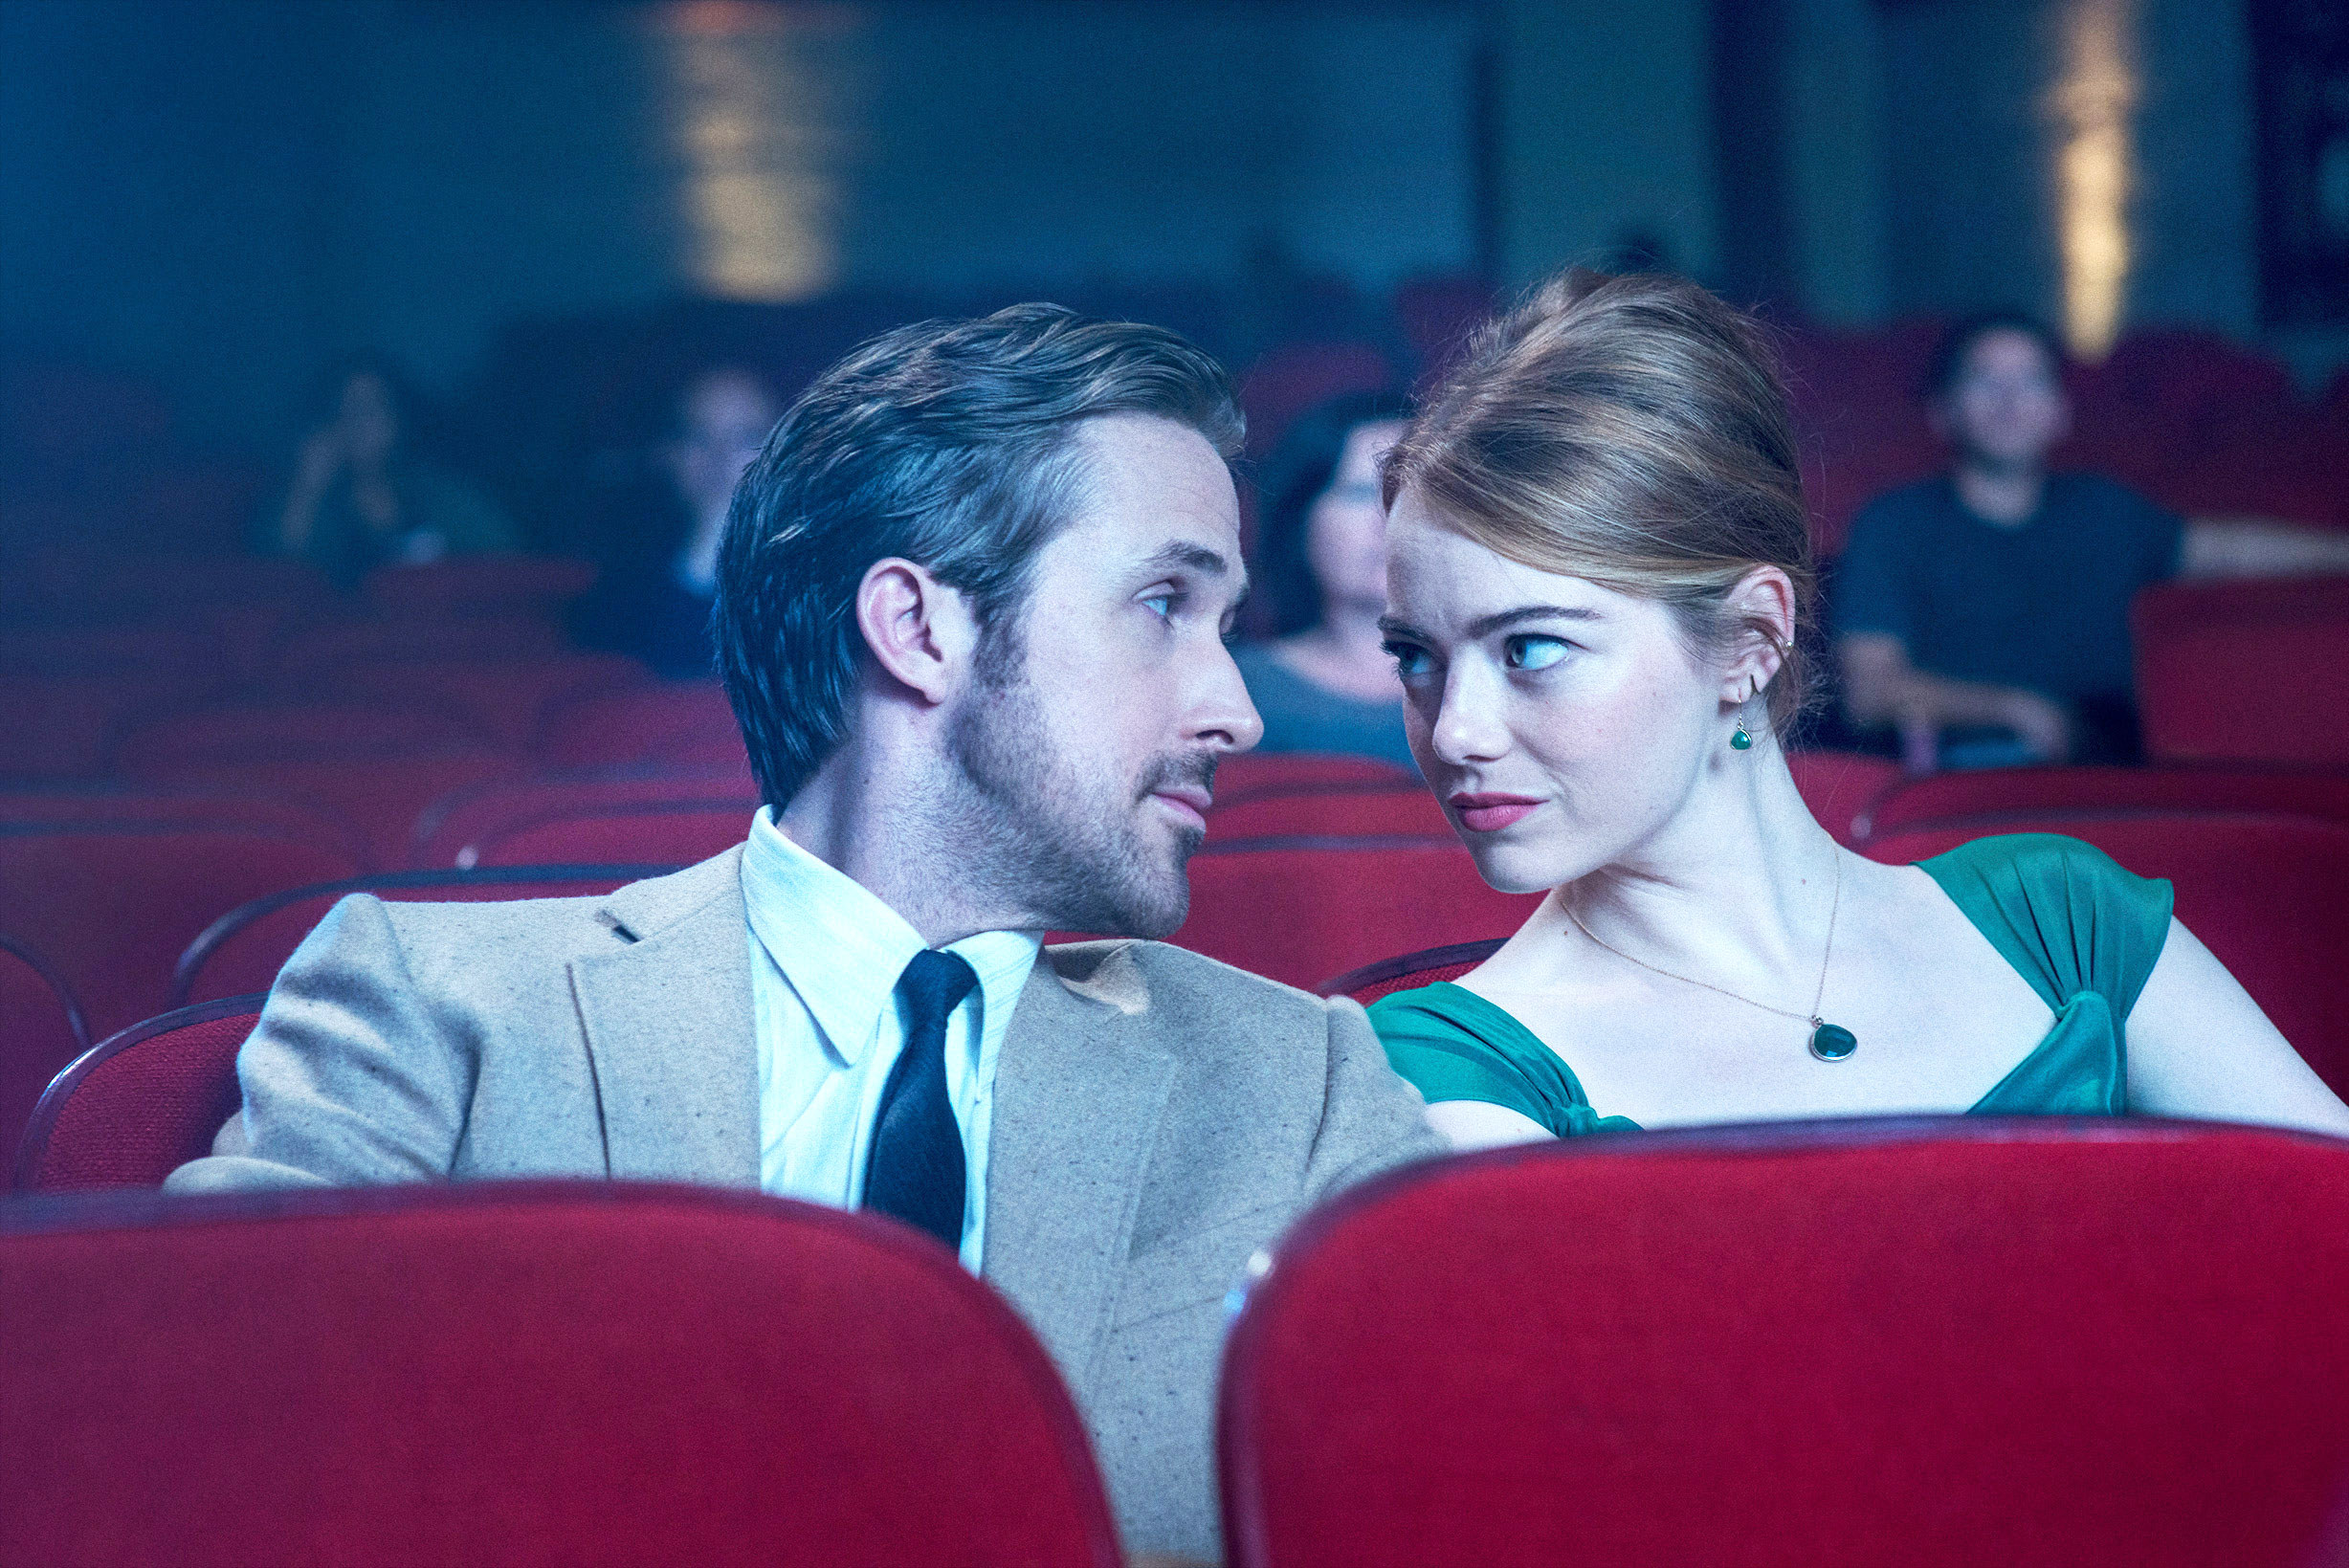 Ryan Gosling, Emma Stone looking at each other in a movie theater